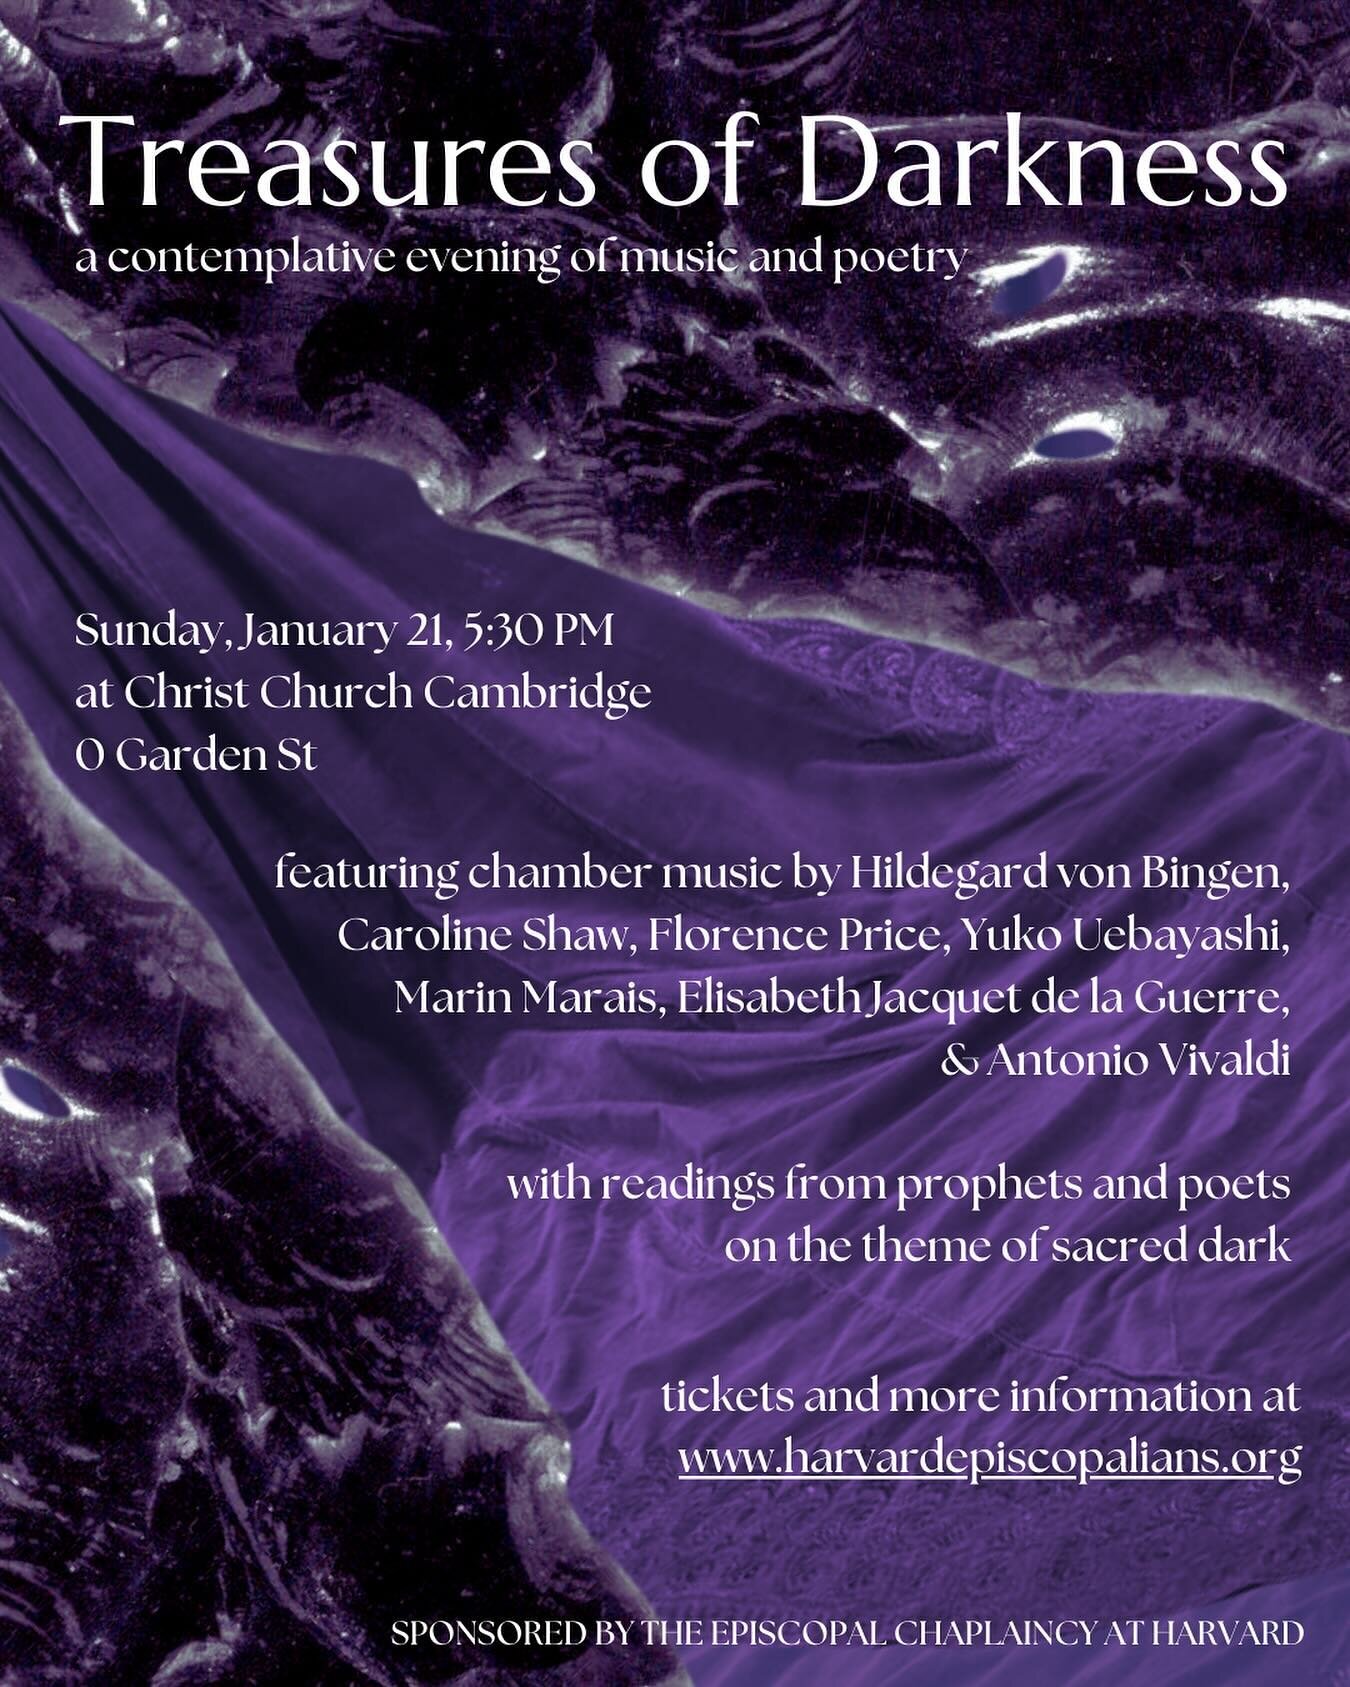 Tickets open now! Link in bio.

The Episcopal Chaplaincy at Harvard welcomes you to an enchanting evening of music and poetry at Christ Church Cambridge on Sunday, January 21 at 5:30 p.m. Immerse yourself in the treasures of darkness as talented arti